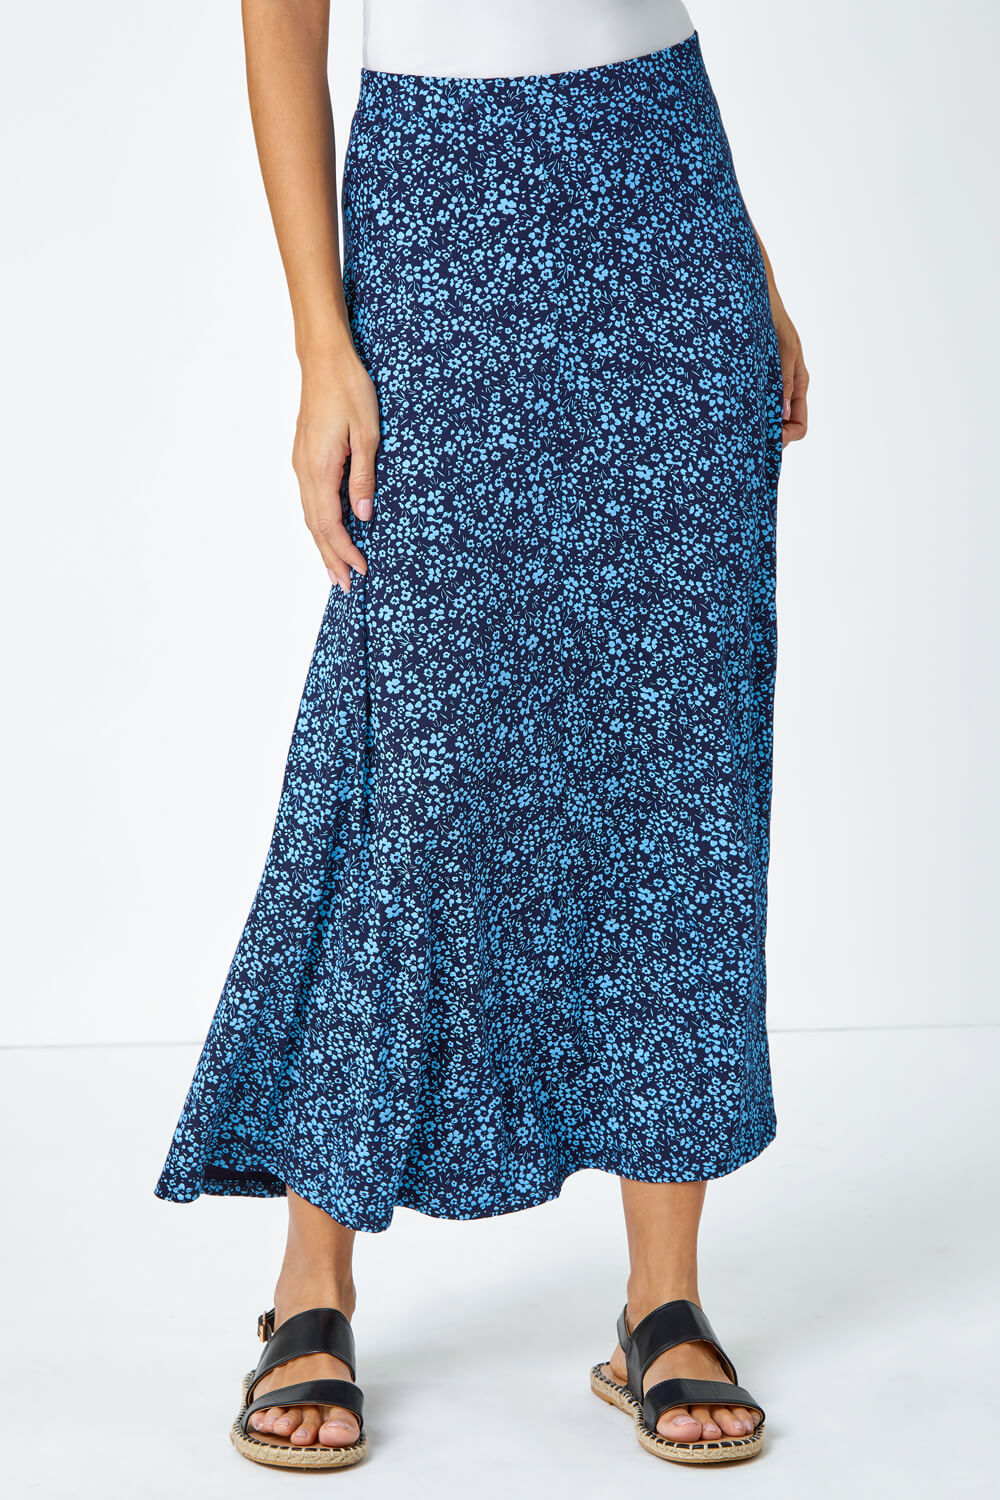 Blue Ditsy Floral Stretch Midi Skirt, Image 4 of 5